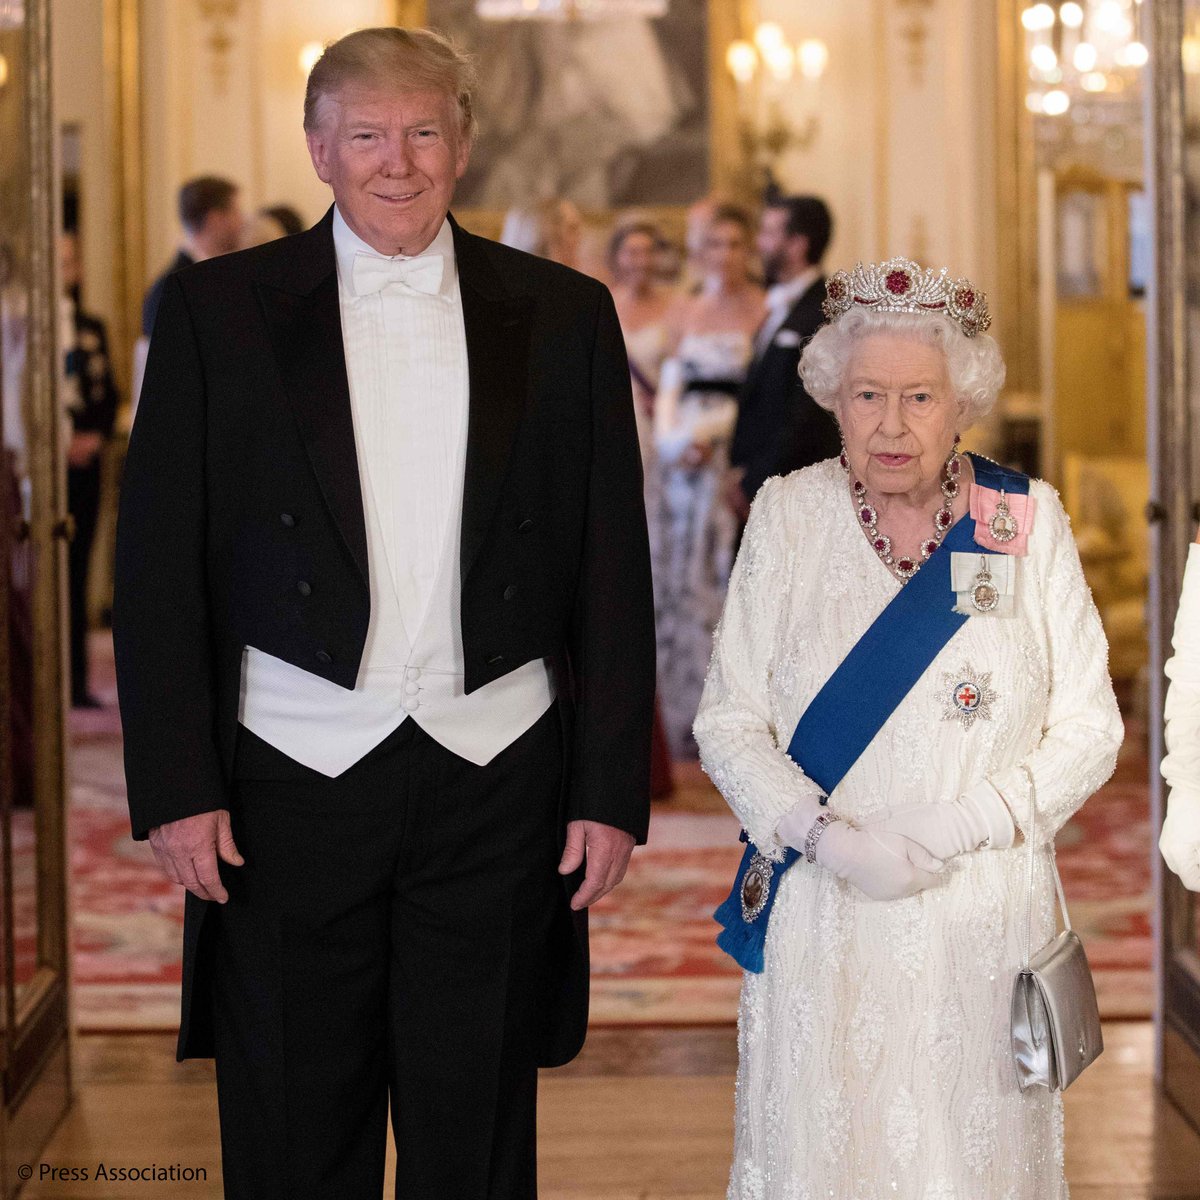 President Donald Trump with Her Majesty Elizabeth II at Buckingham Palace on 3rd June 2019.